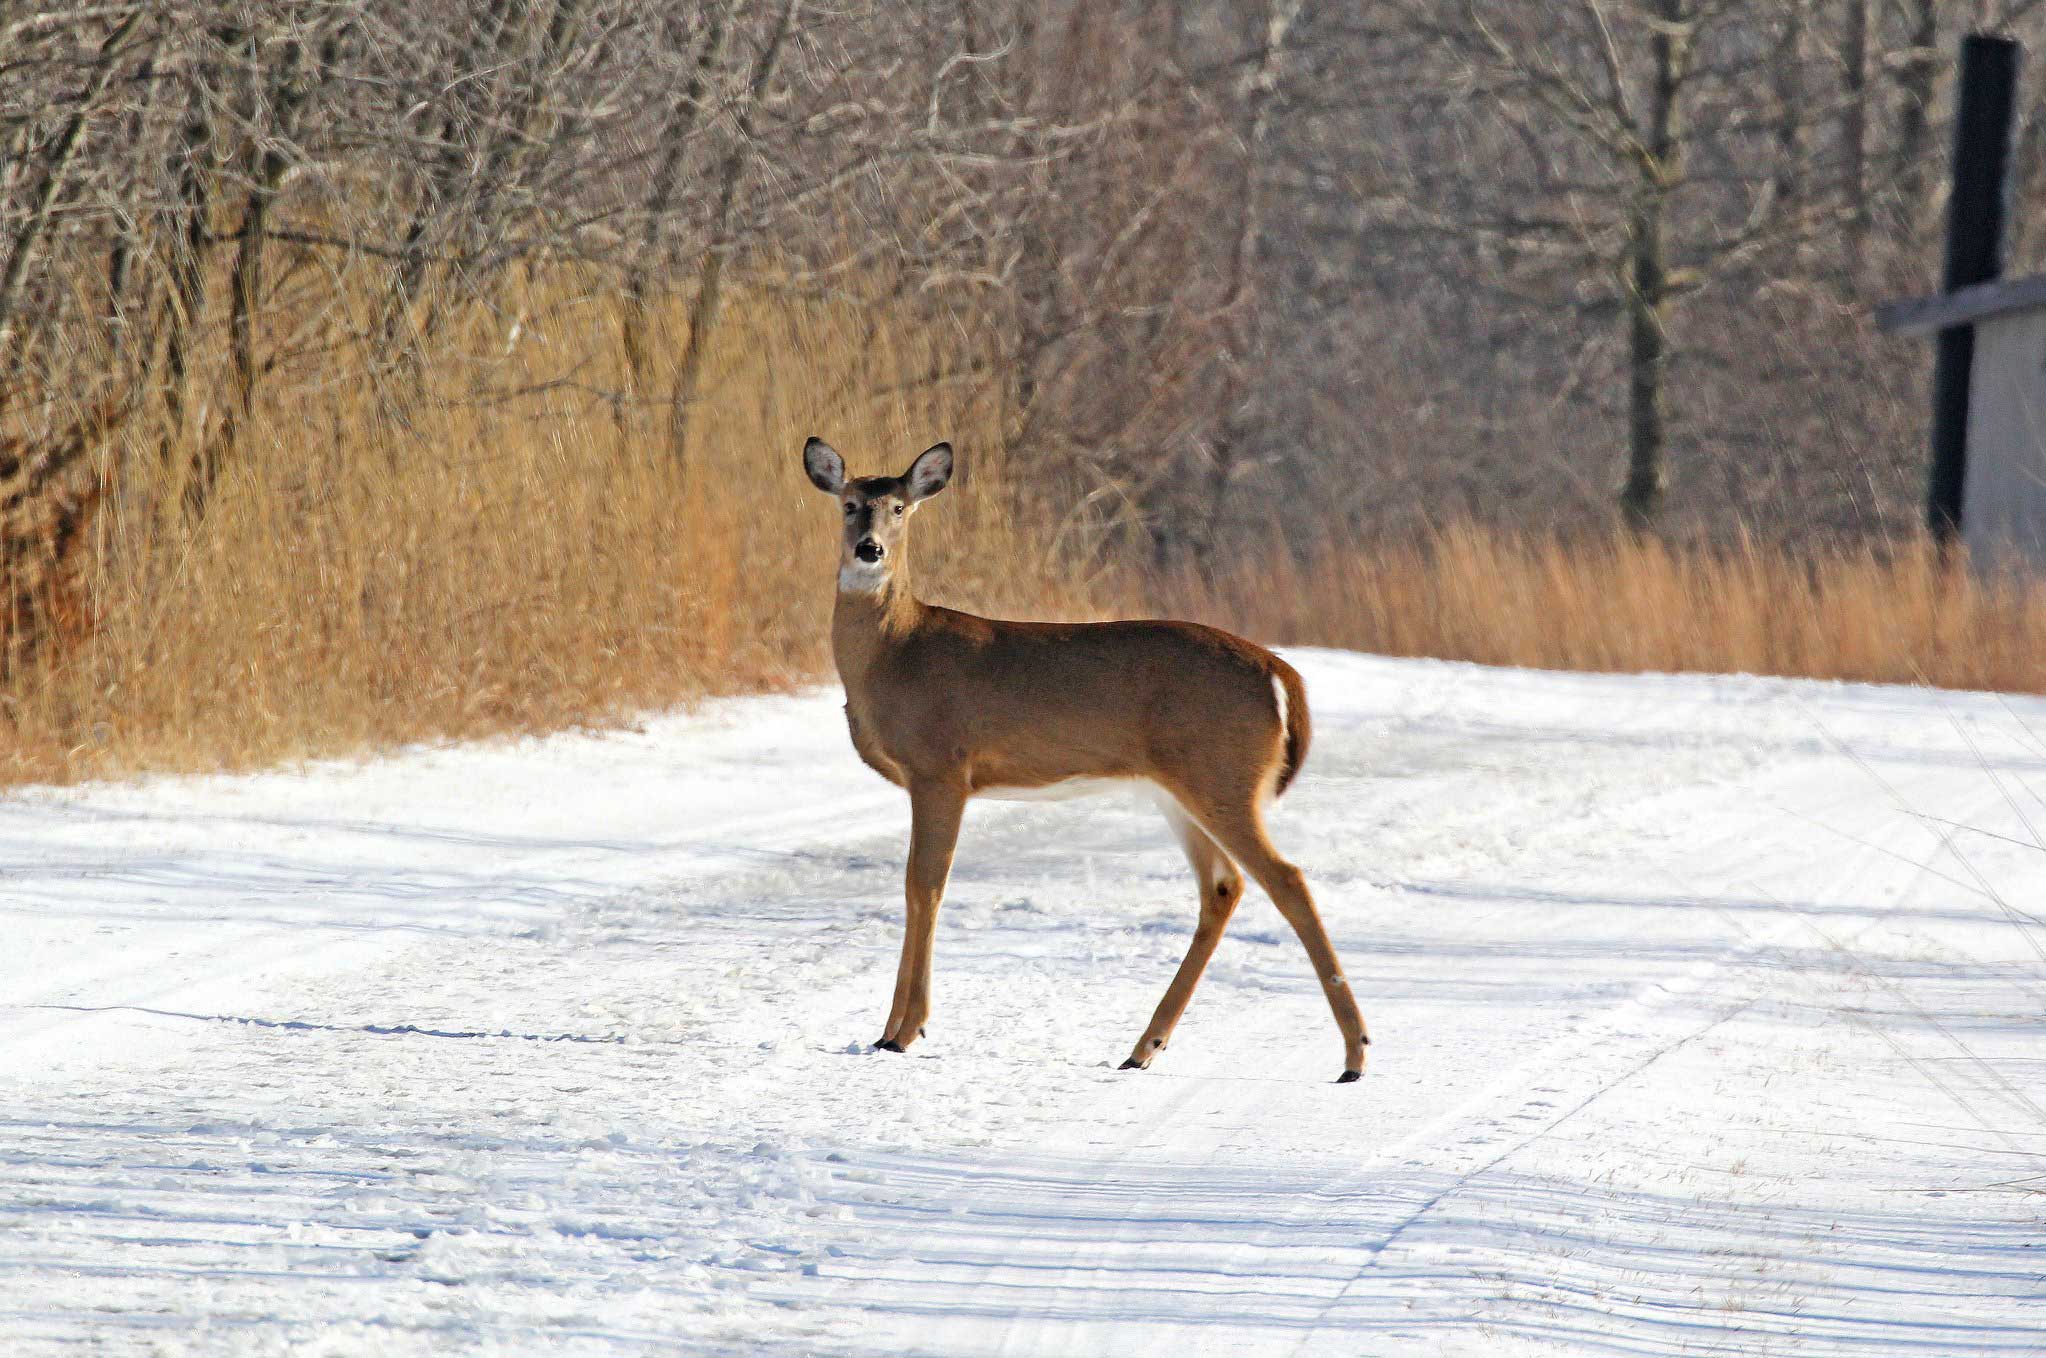 A deer walking across a snow-covered trail.